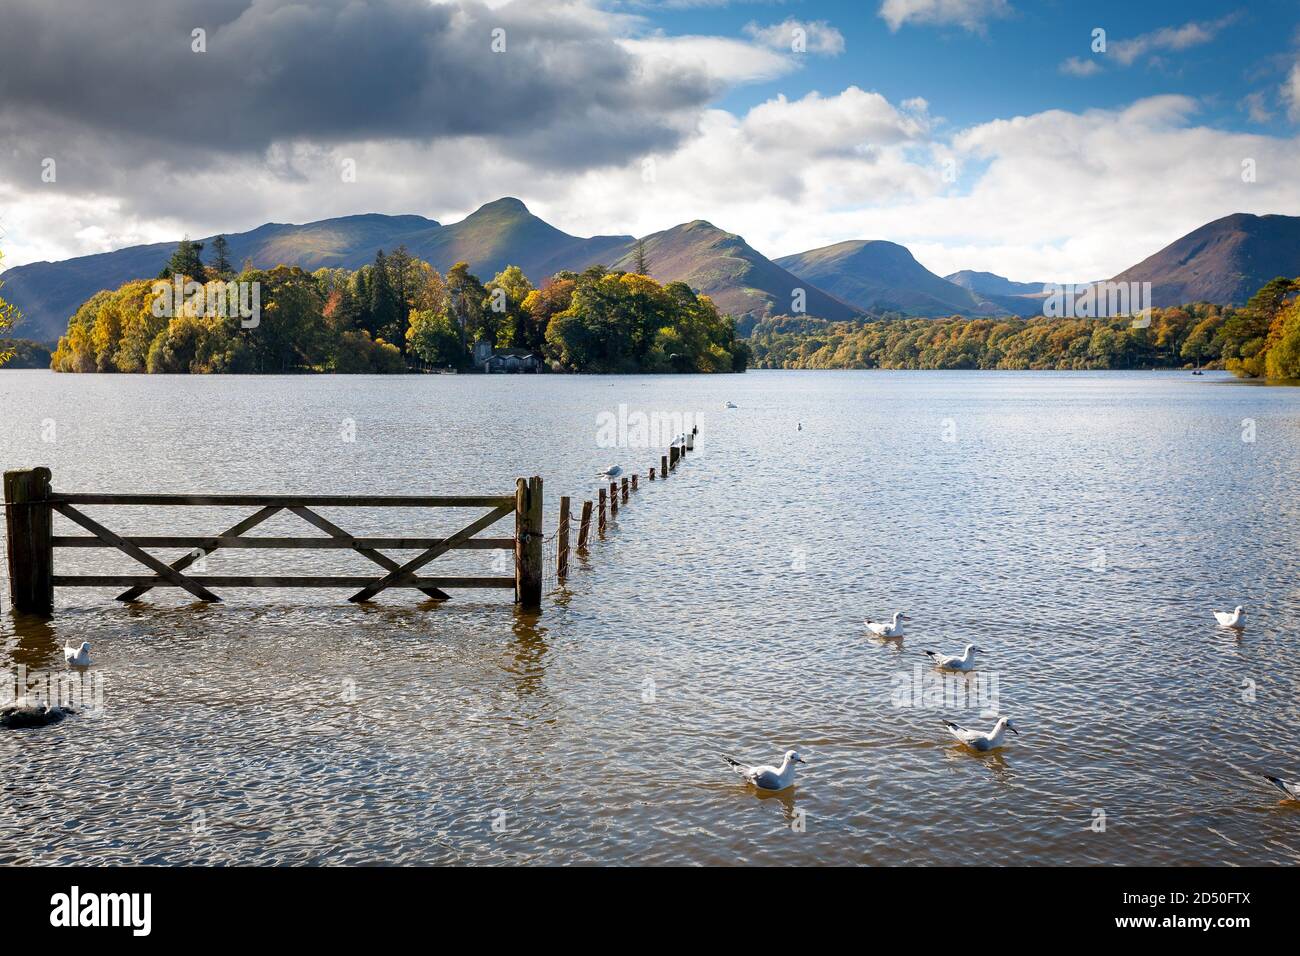 Submerged gate in a tranquil bay on Lake Derwentwater in the English Lake District Stock Photo